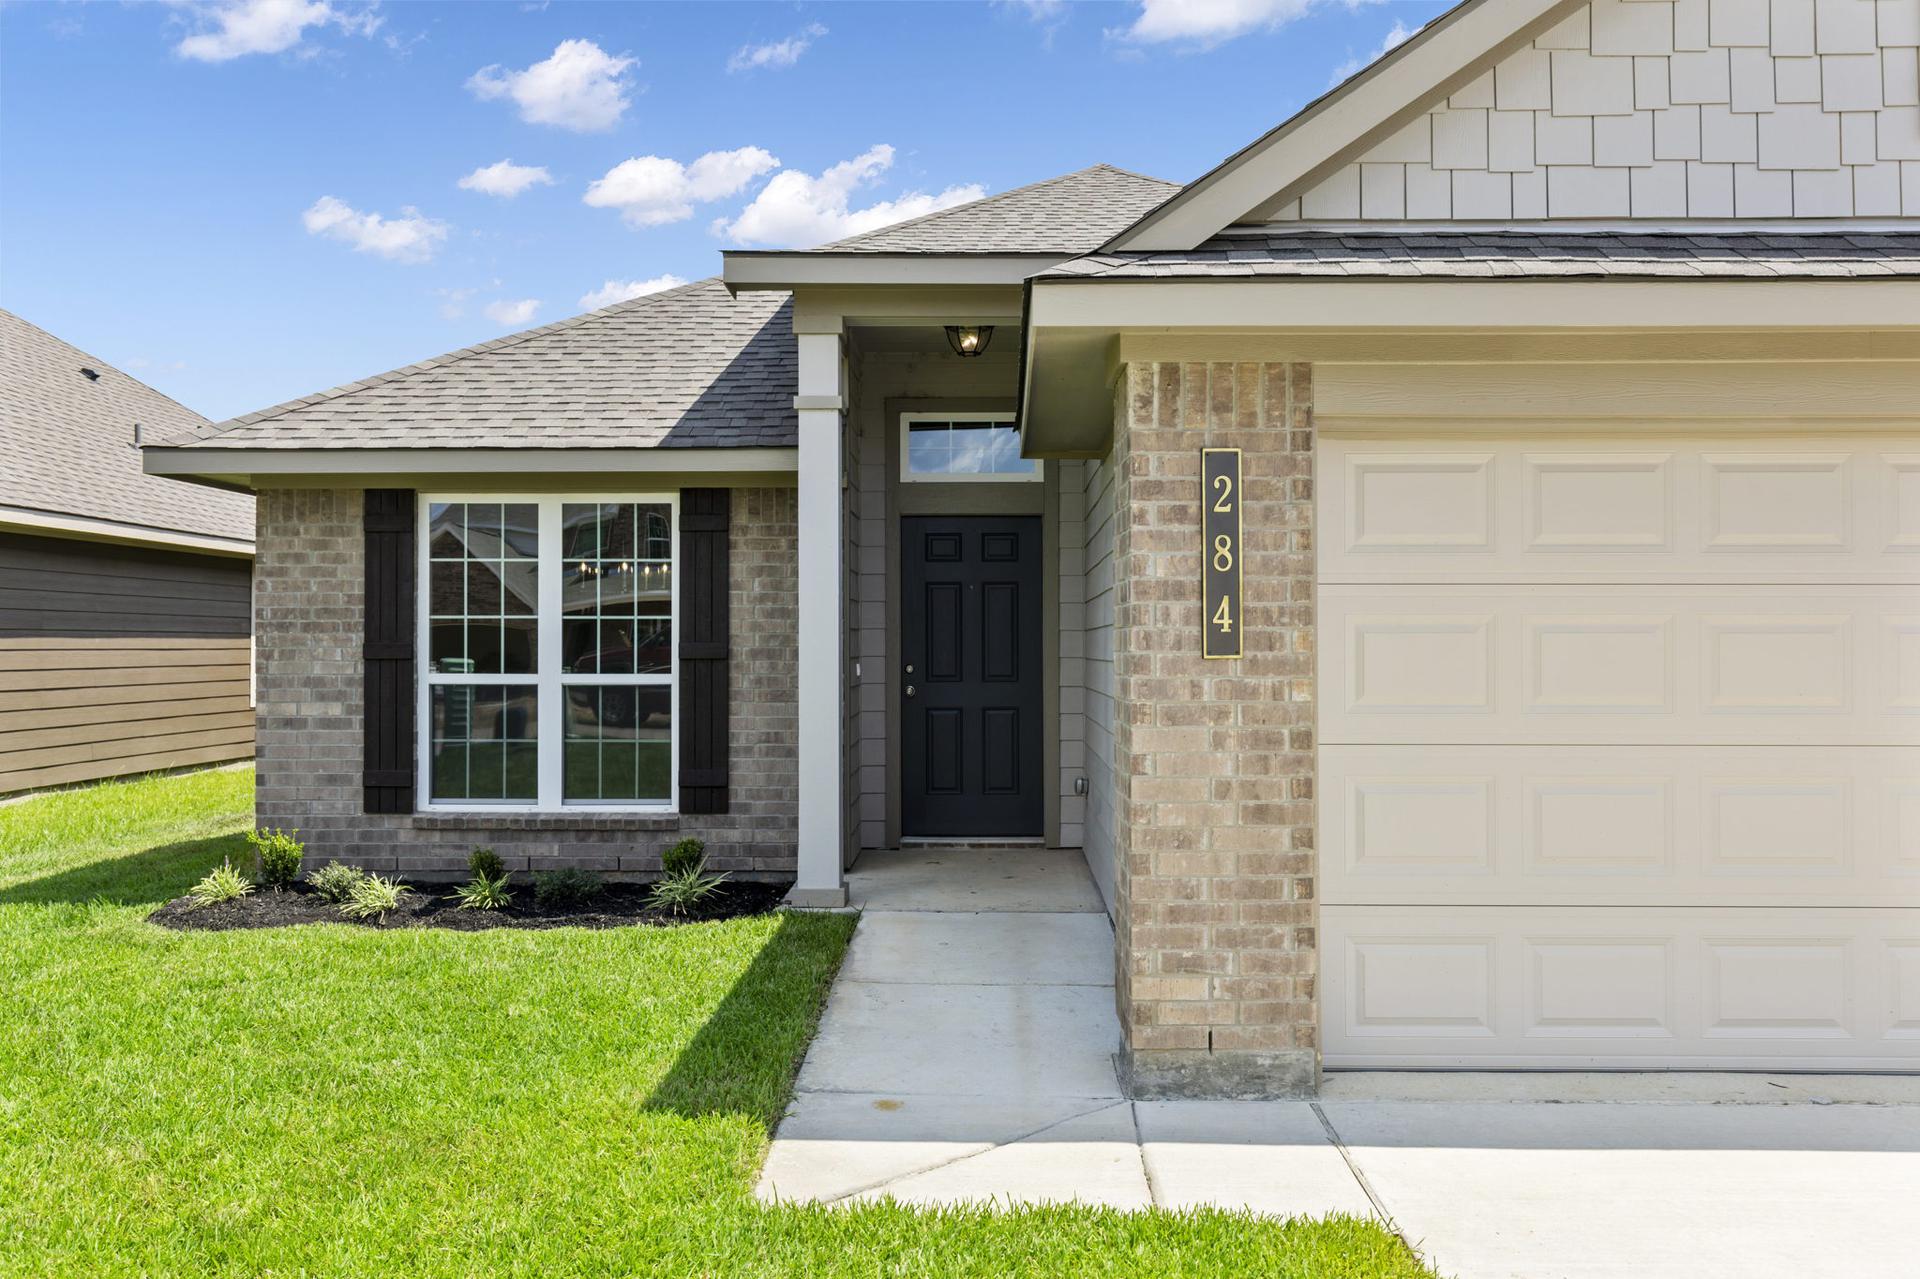 1,448sf New Home in Conroe, TX